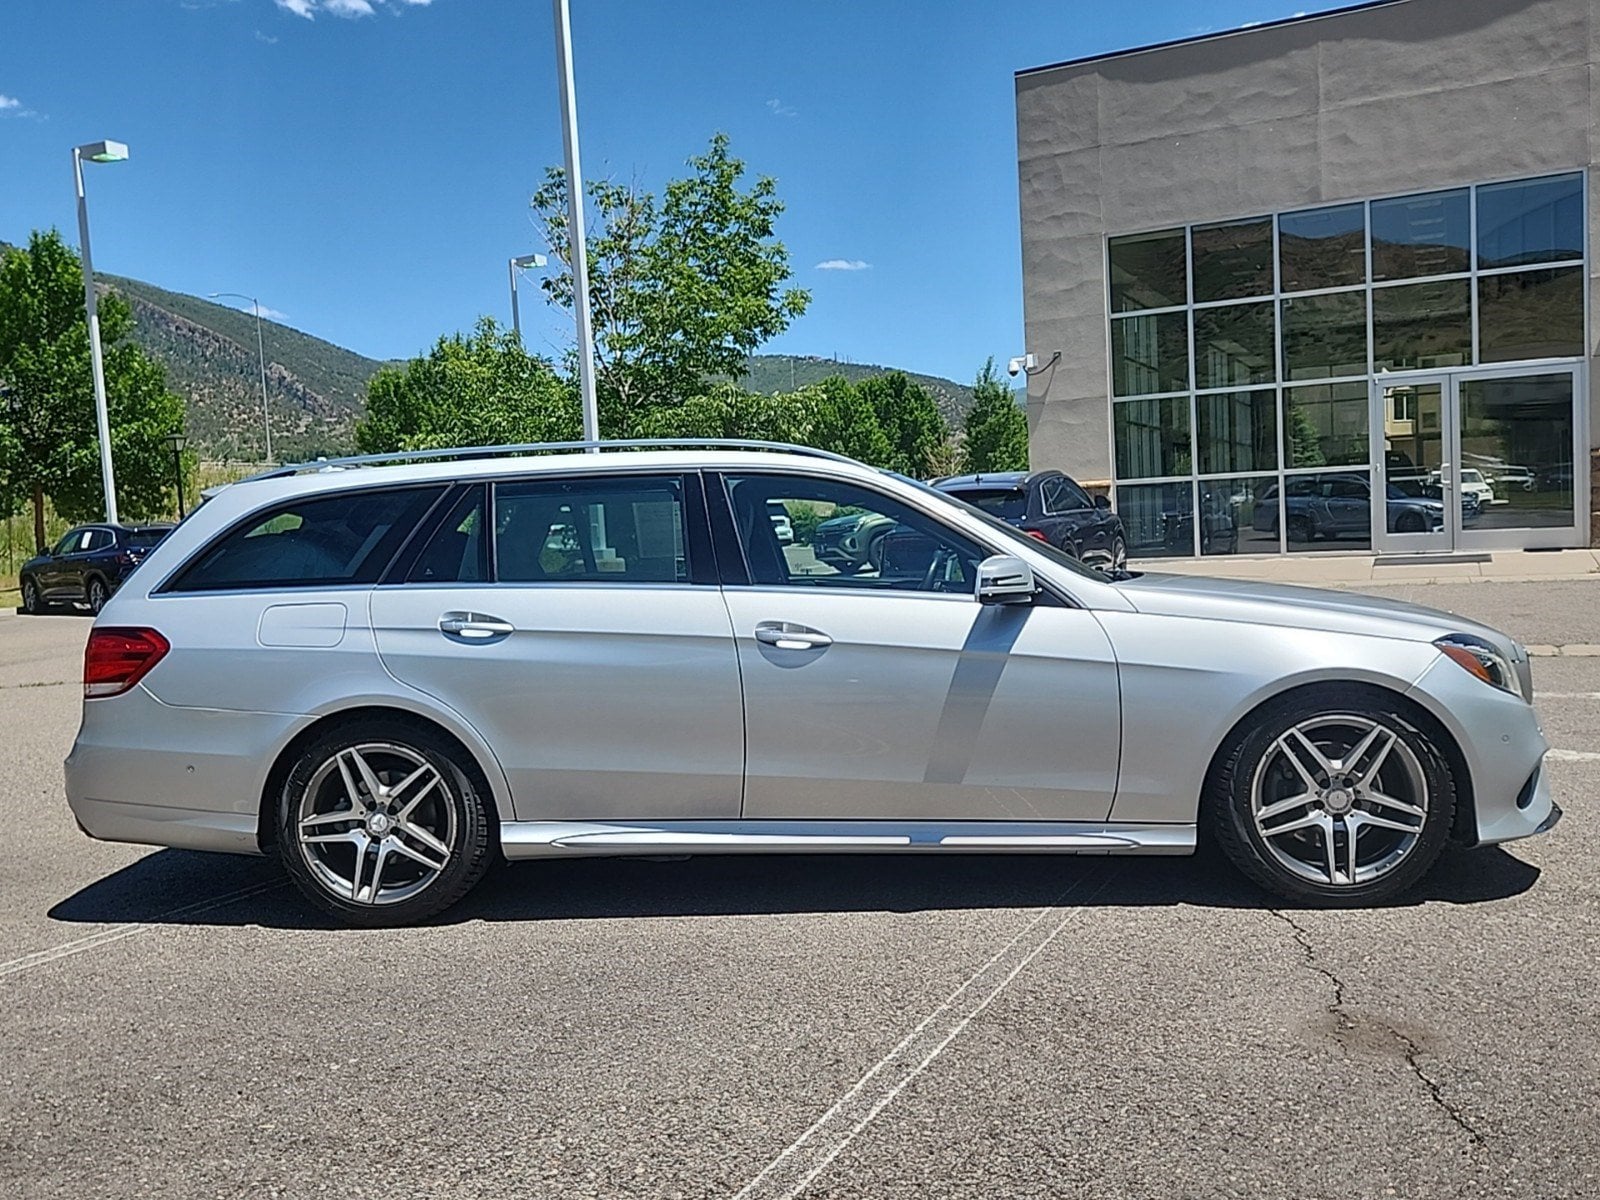 Used 2016 Mercedes-Benz E-Class E350 with VIN WDDHH8JB2GB208010 for sale in Glenwood Springs, CO